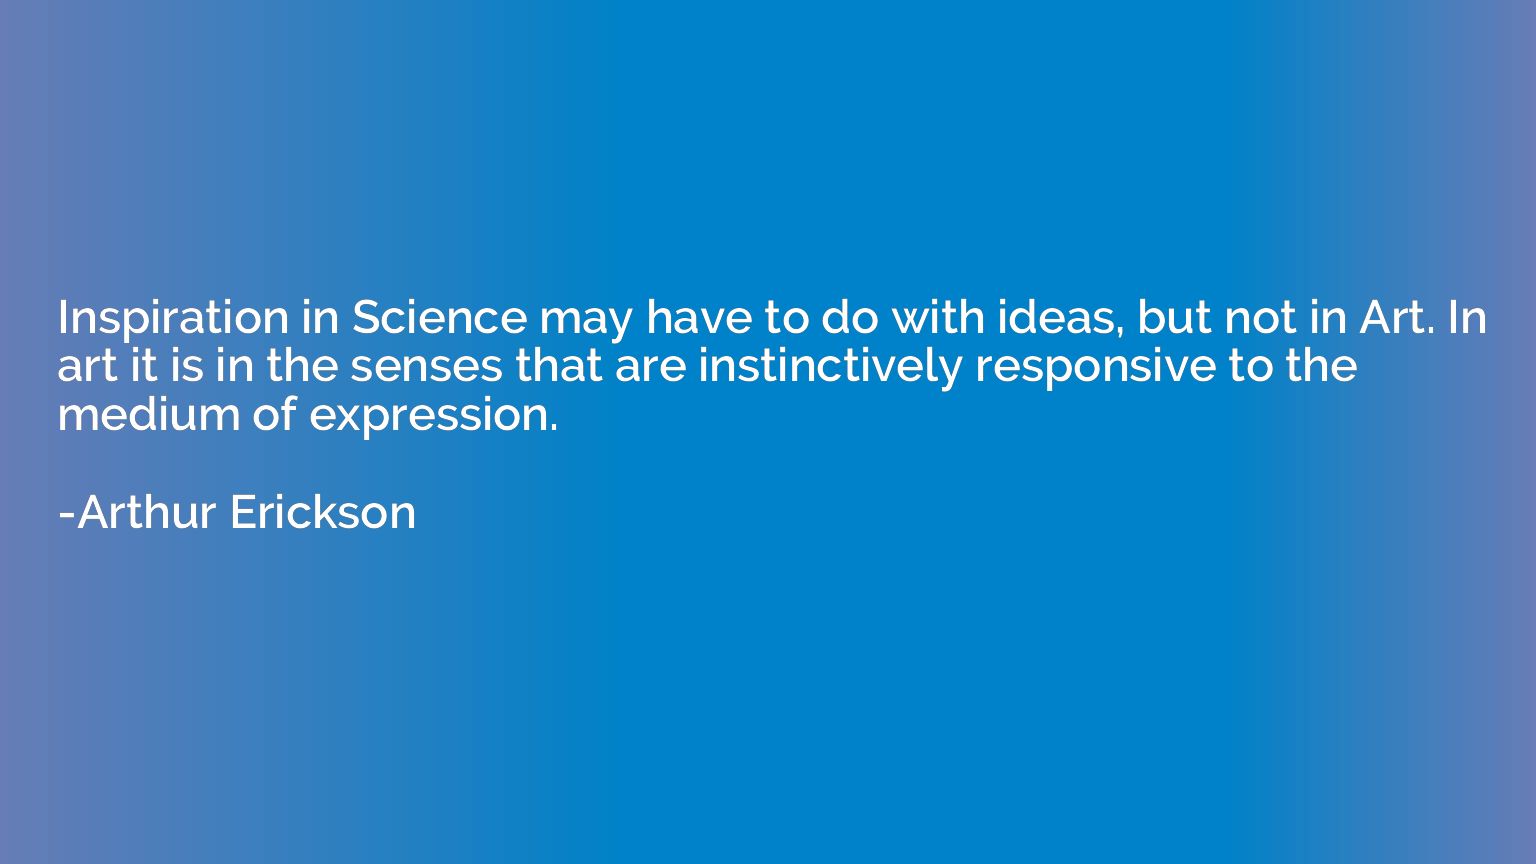 Inspiration in Science may have to do with ideas, but not in